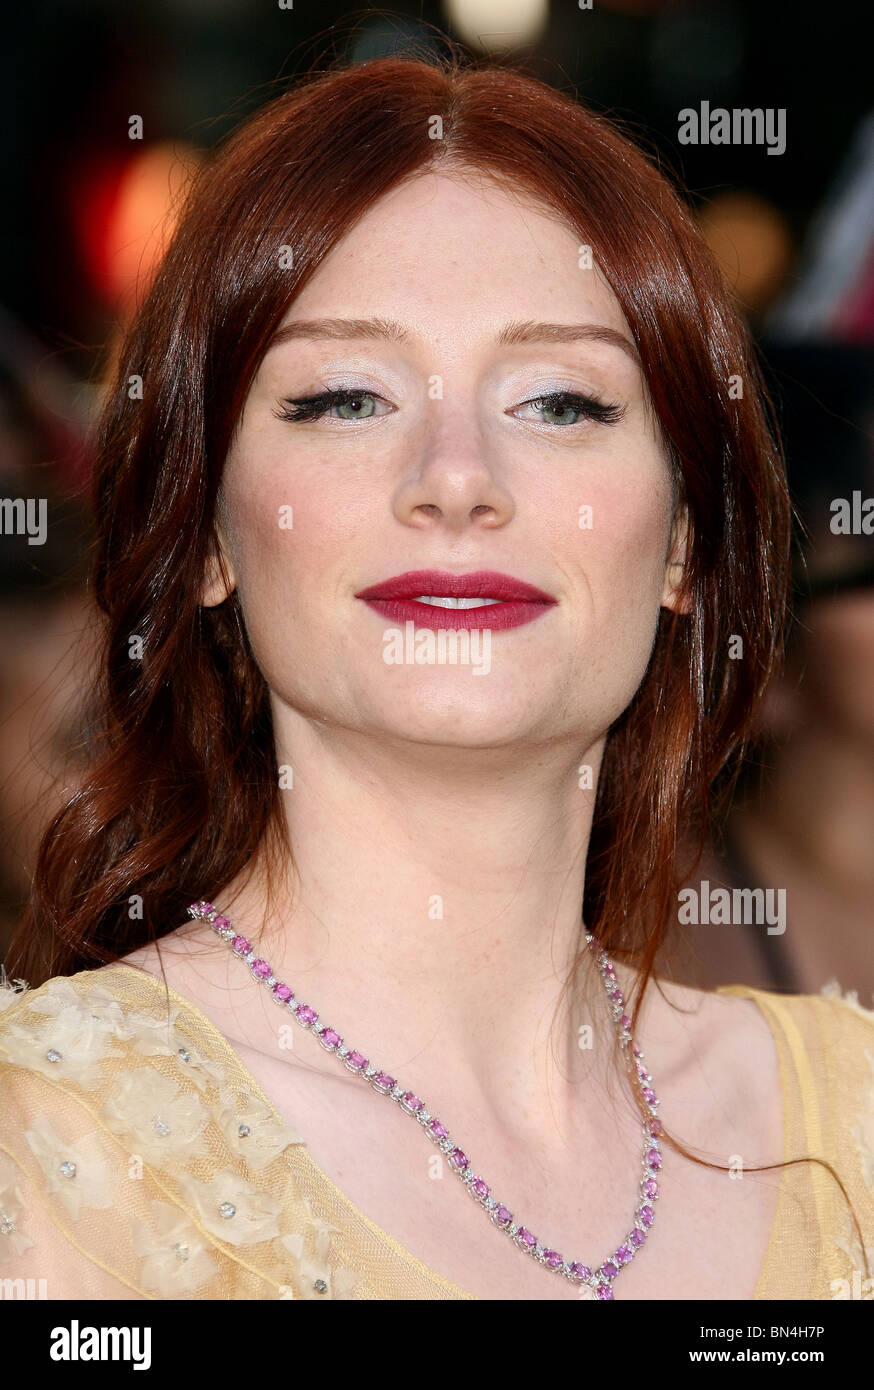 BRYCE DALLAS HOWARD THE TWILIGHT SAGA: ECLIPSE PREMIERE AT THE LOS ANGELES FILM FESTIVAL DOWNTOWN LOS ANGELES CA 24 June 201 Stock Photo